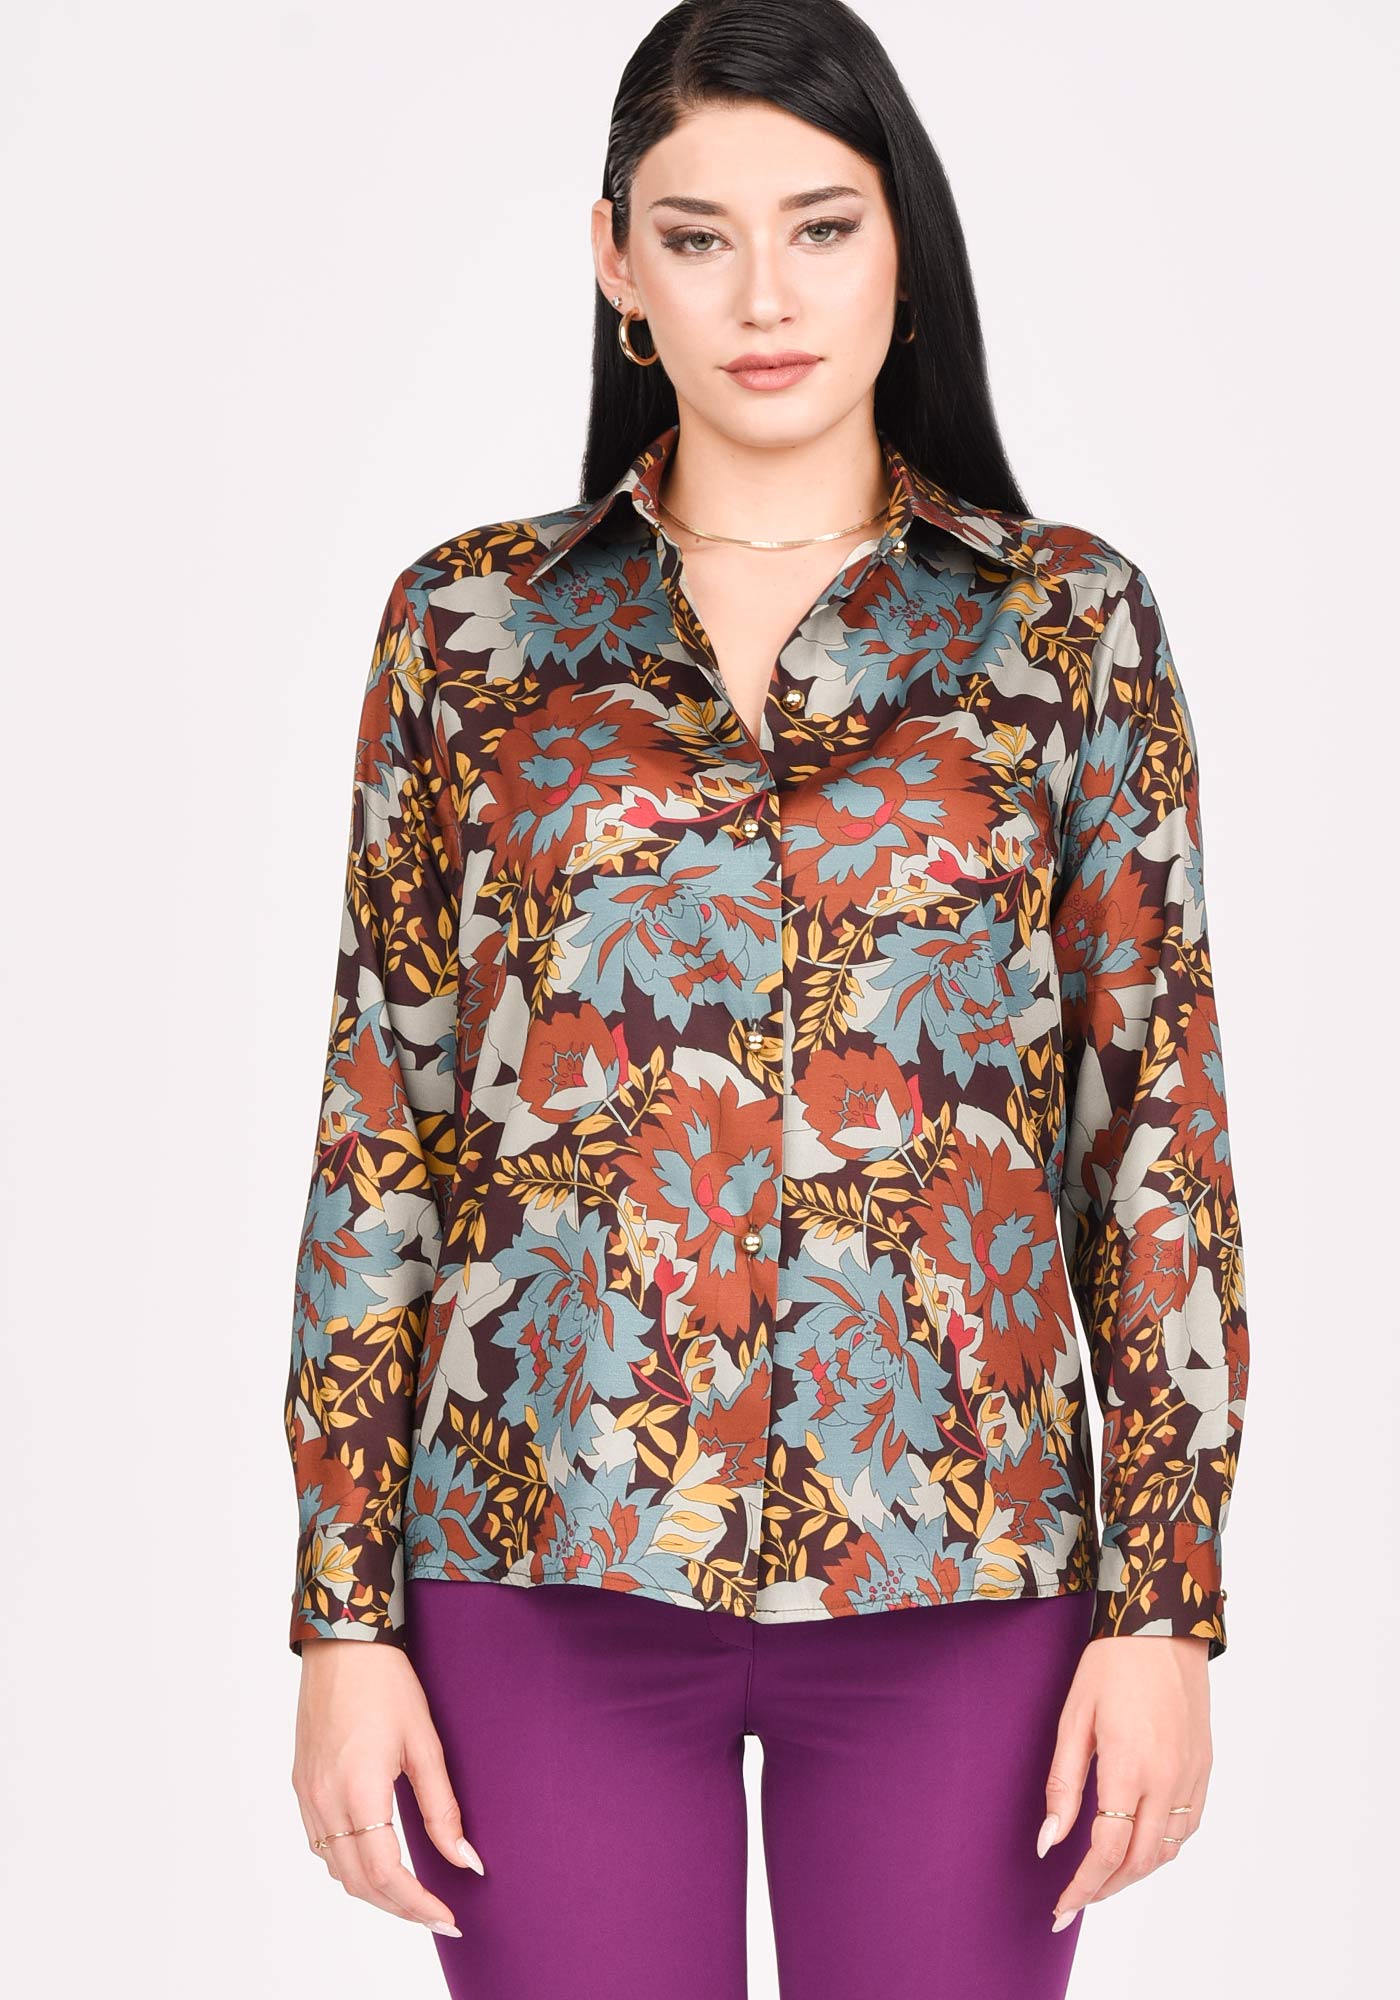 Women's Relaxed Button up Shirt in Floral Satin